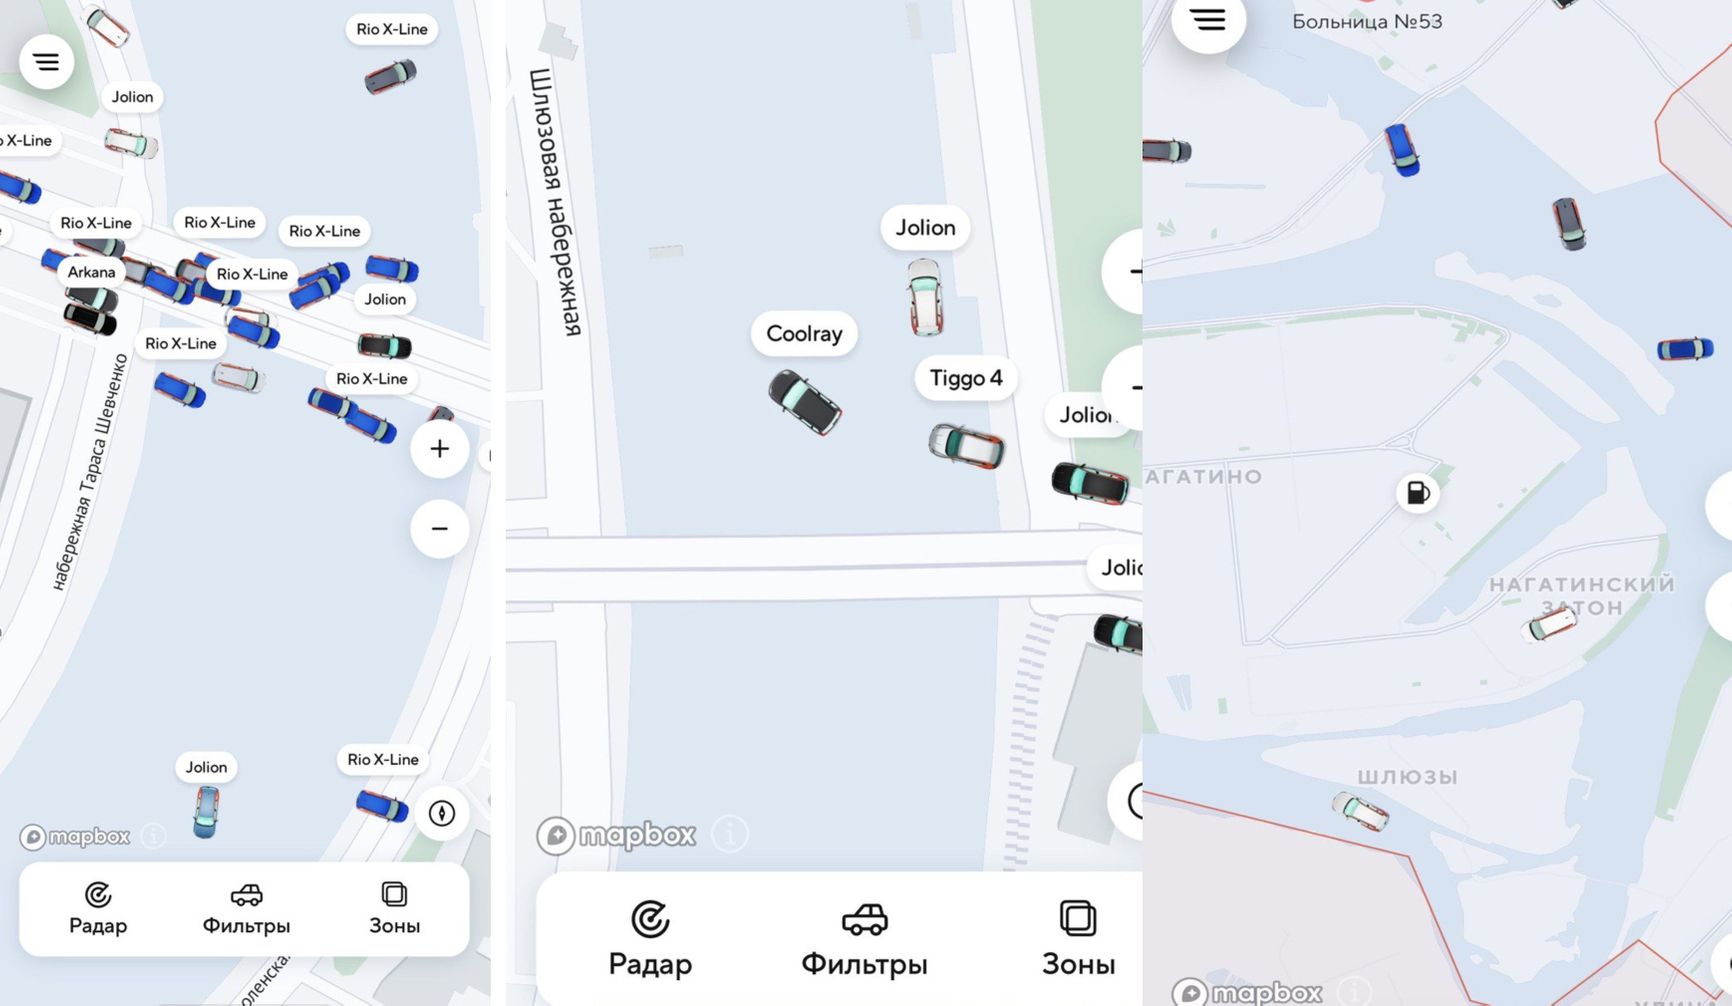 Users reported vehicles “floating” in the Moscow River on their apps